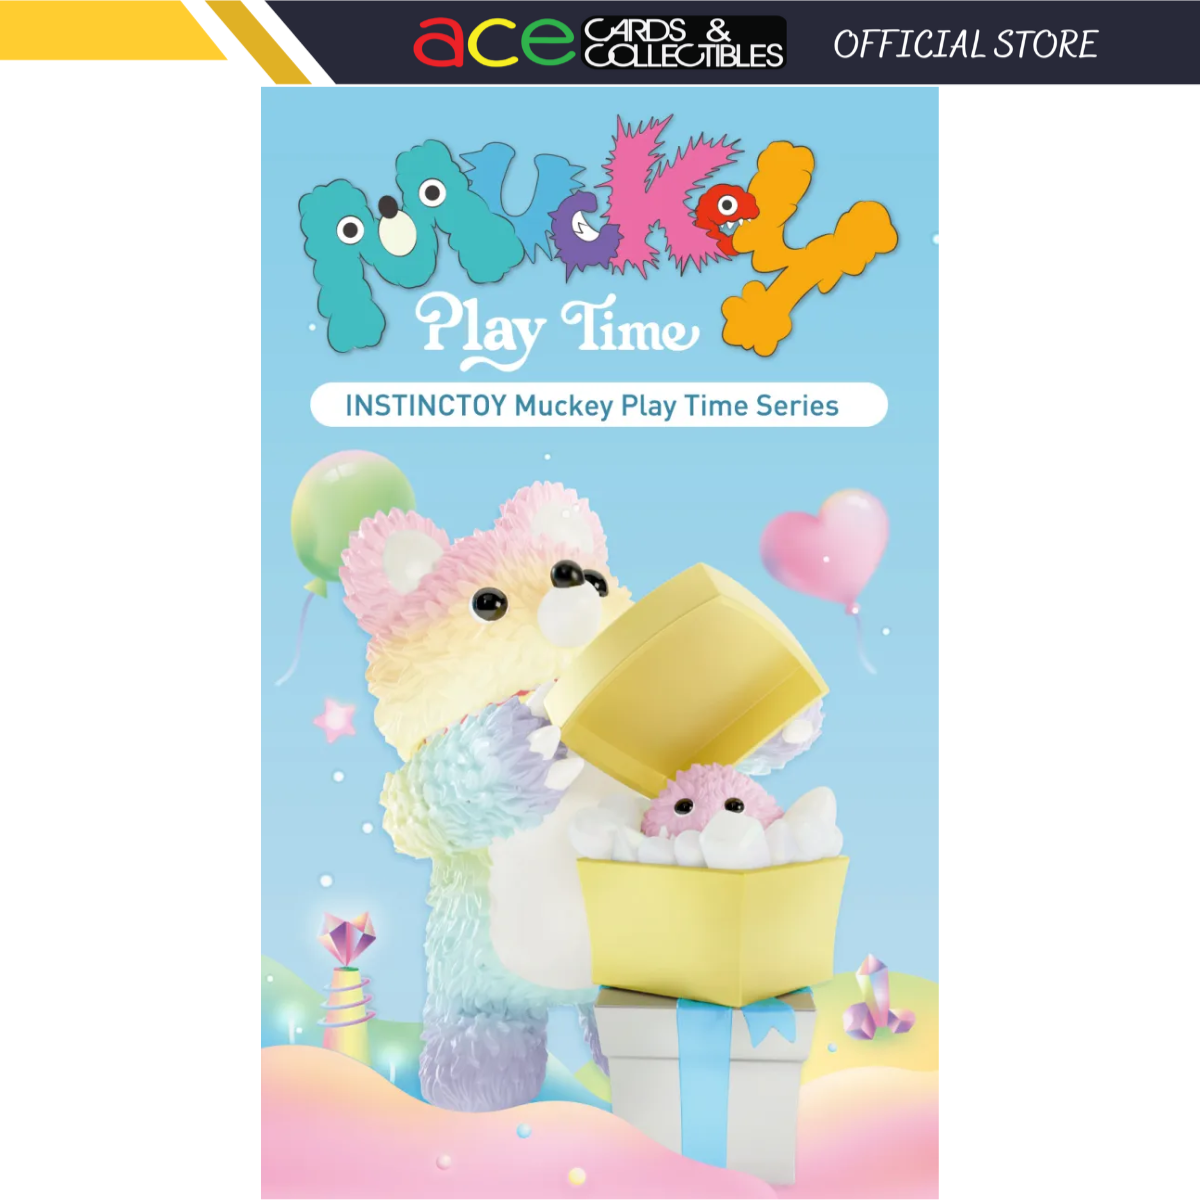 INSTINCTOY Muckey Play Time Series Blind Box by POP MART